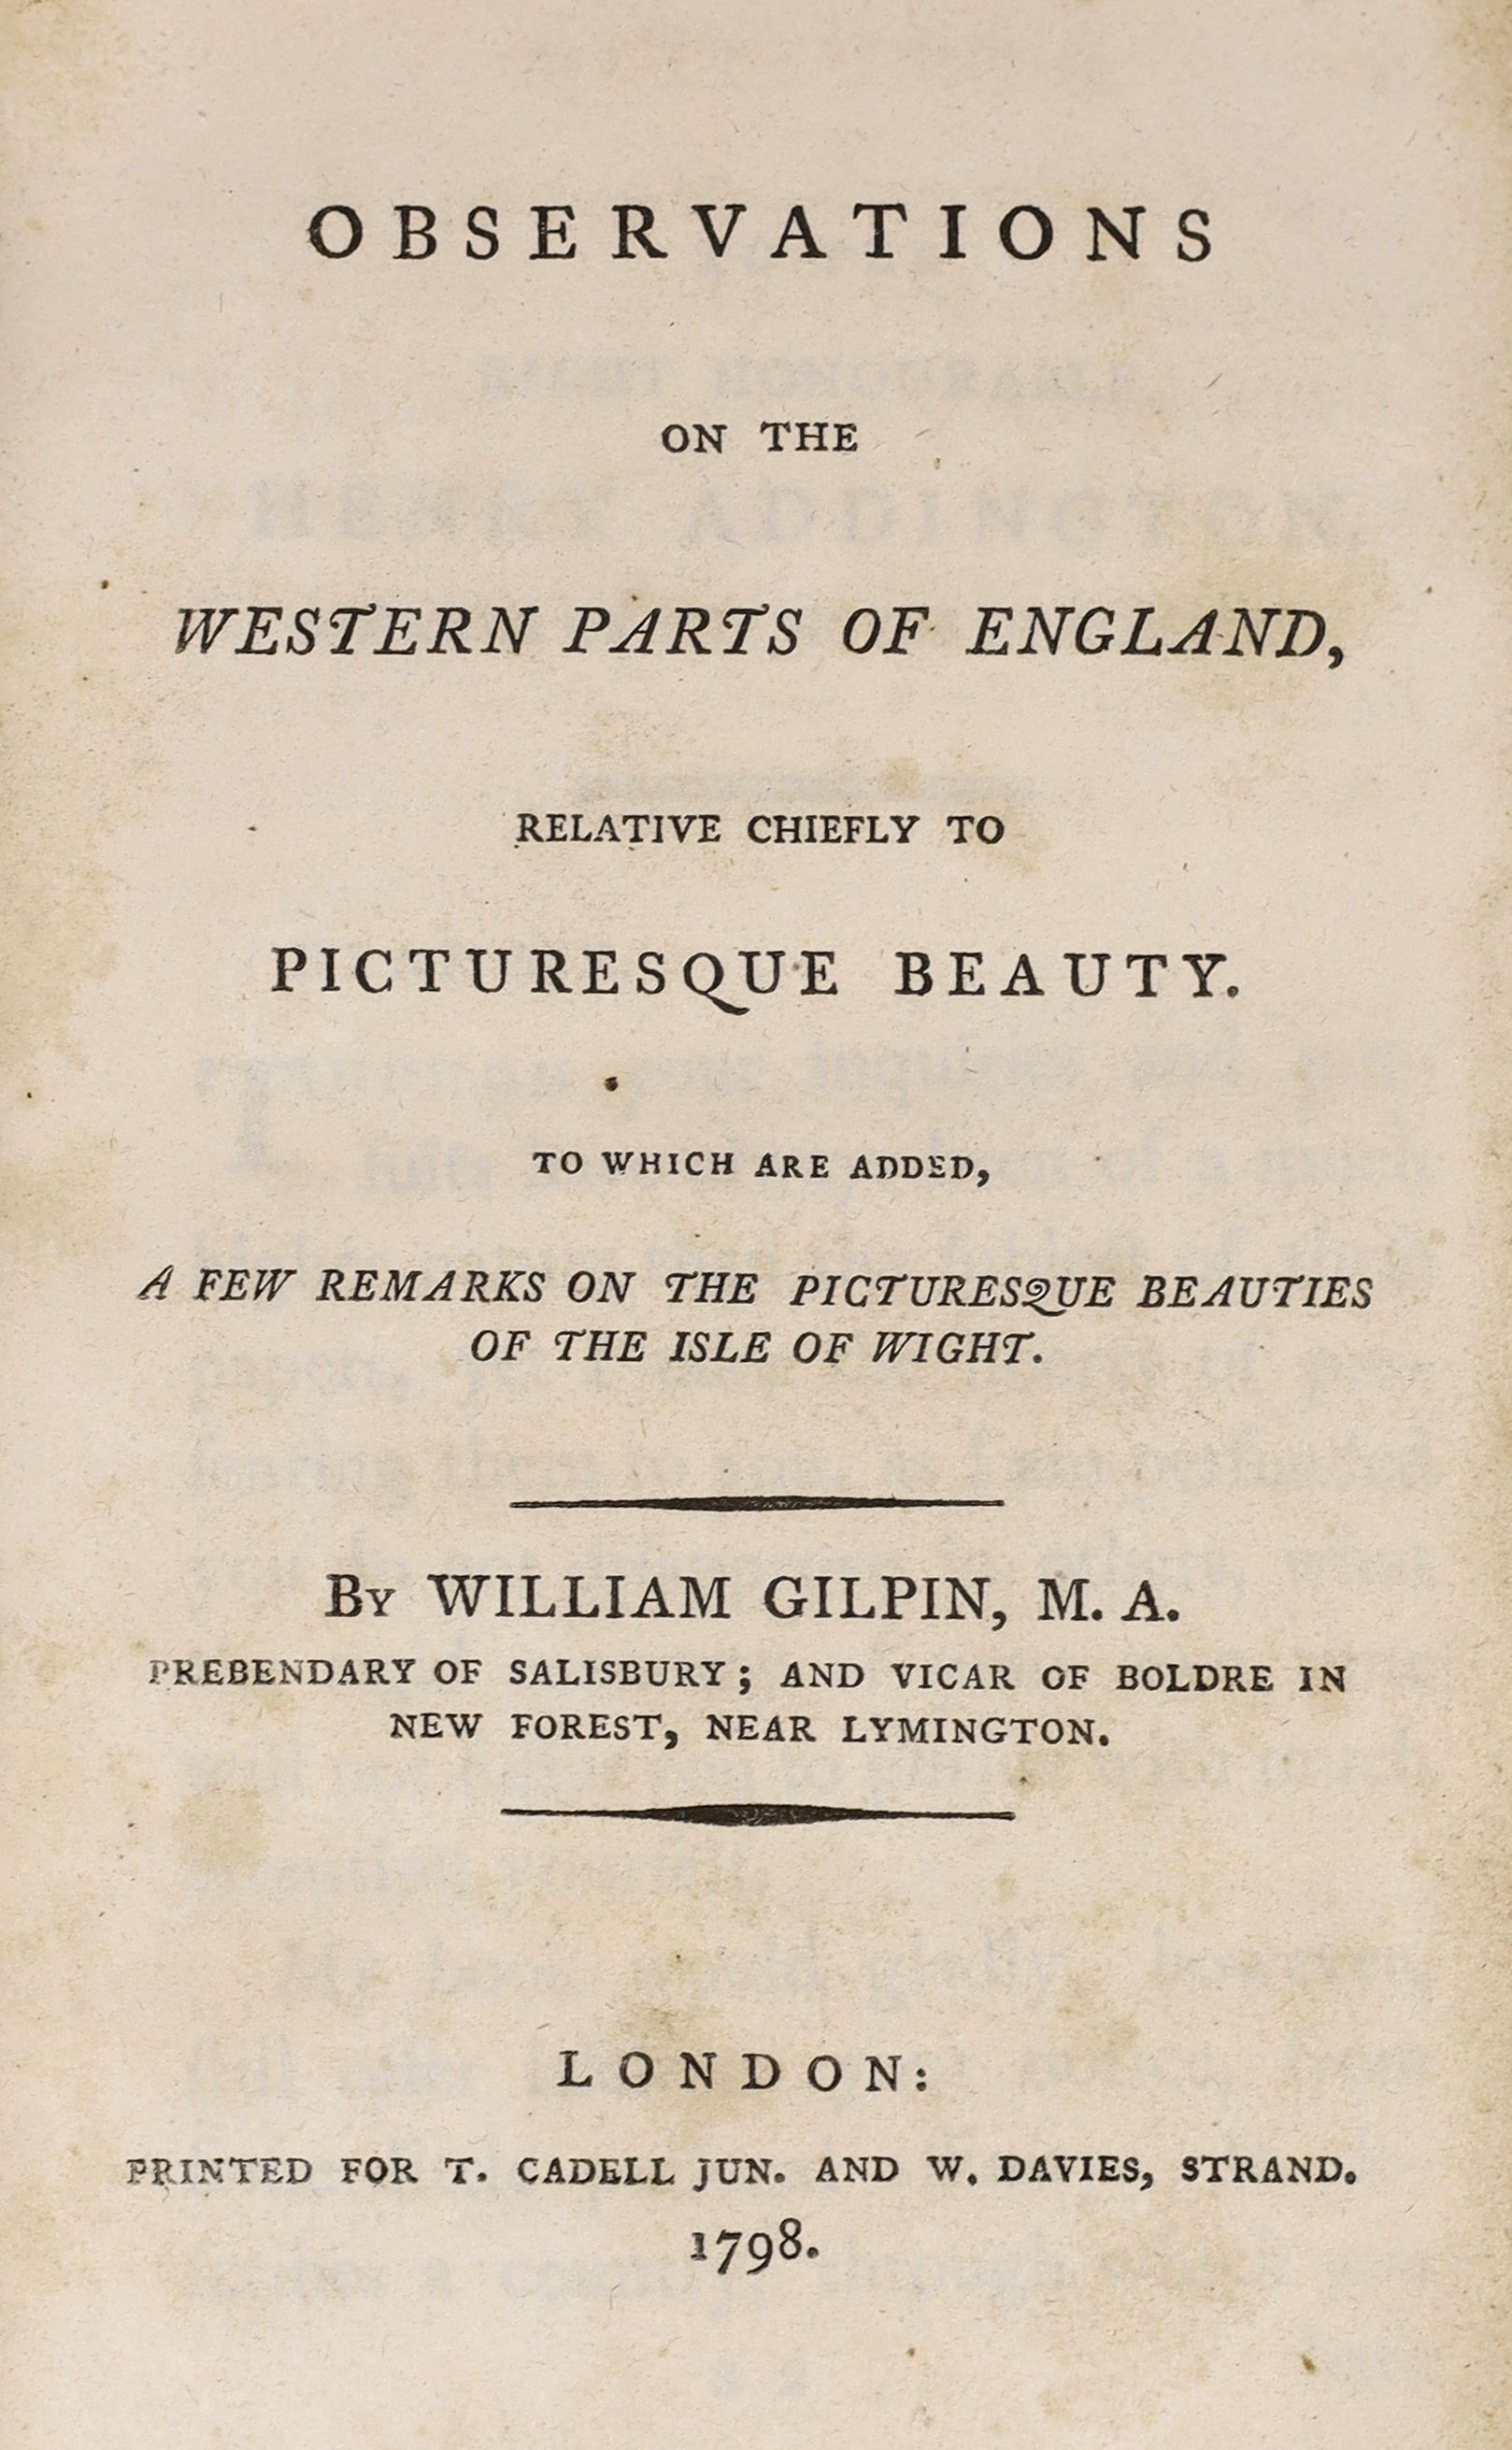 Gilpin, William - Observations on the Western Parts of England relative chiefly to Picturesque Beauty, 8vo, burr calf, with 18 tinted plates, T. Cadell & W. Davies, London, 1798